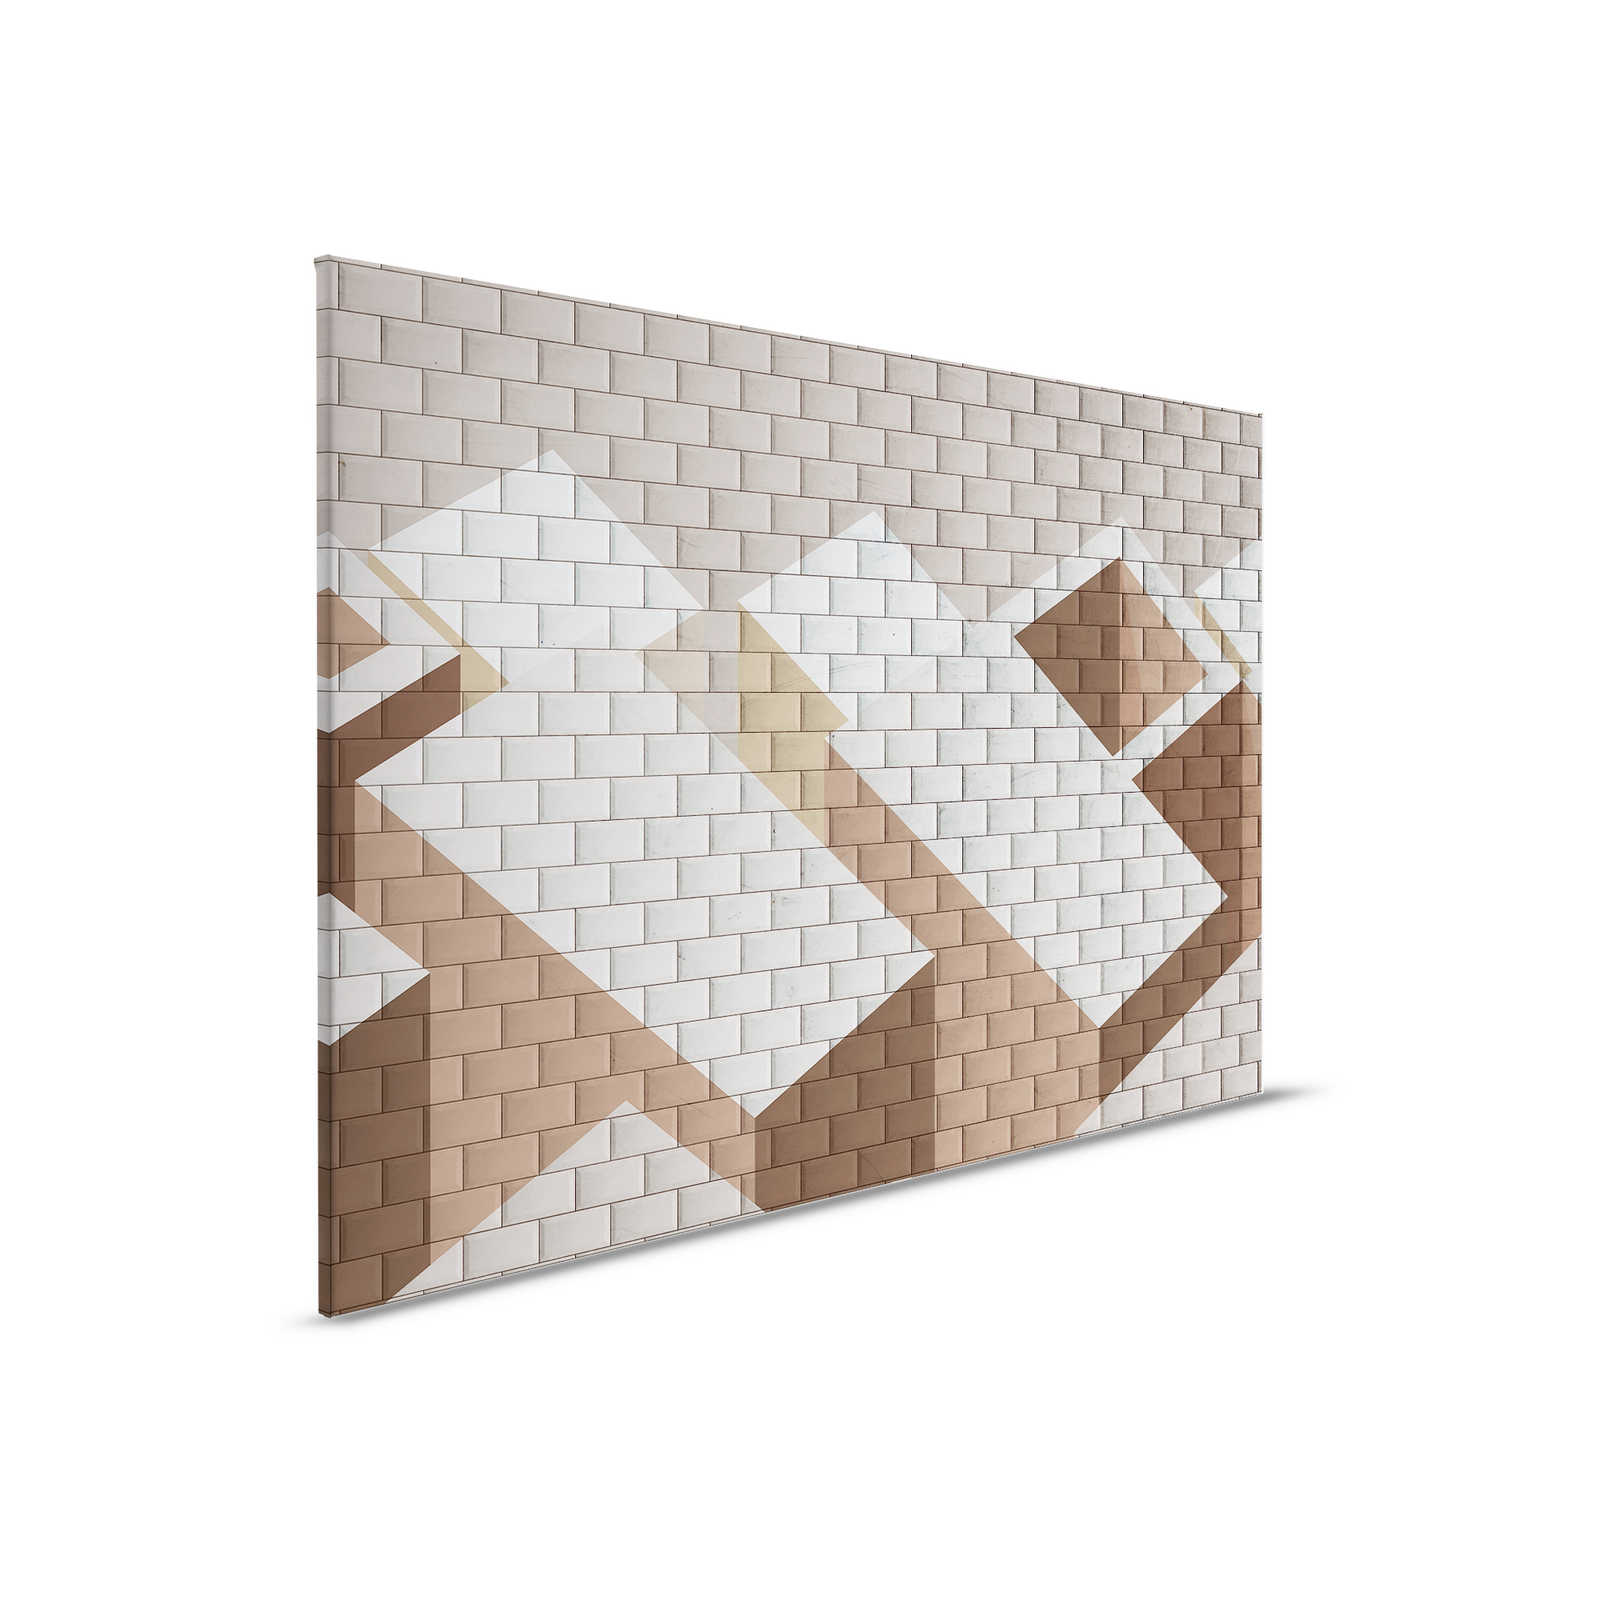         Canvas painting Brick Wall with Block Painting | beige - 0,90 m x 0,60 m
    